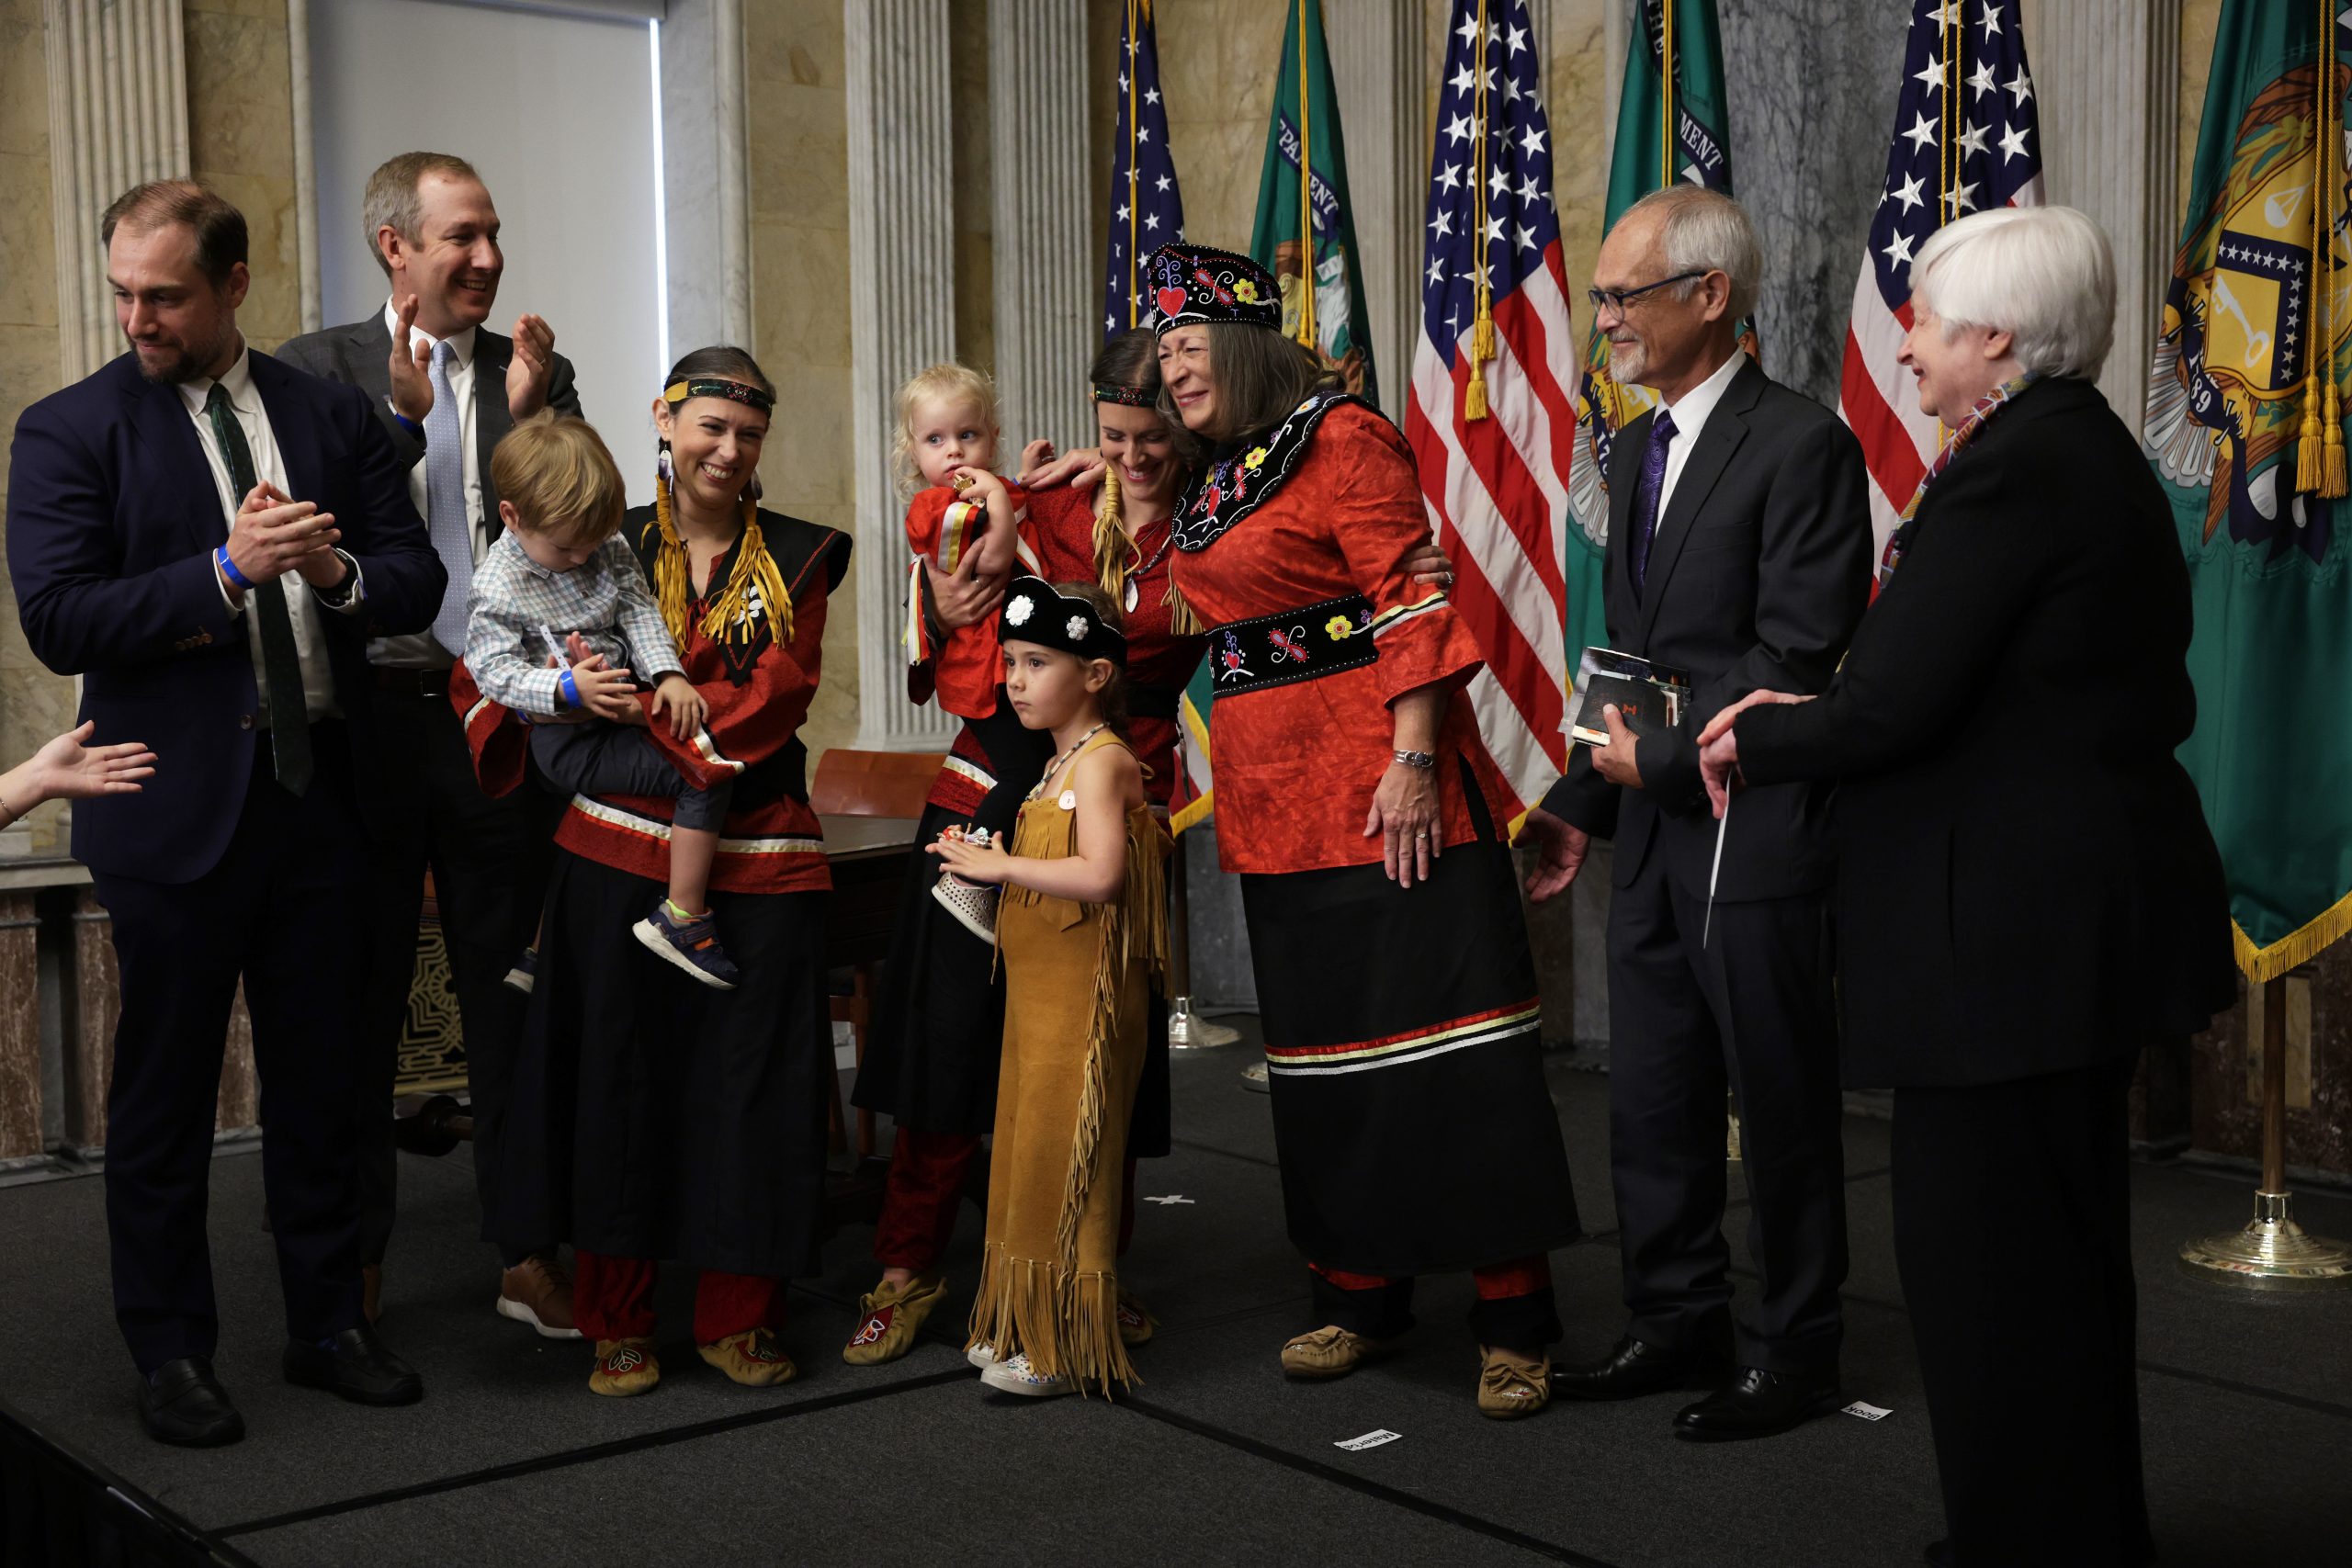 WASHINGTON, DC - SEPTEMBER 12: U.S. Treasurer and Mohegan Tribe Chief Lynn Malerba (C) shares a moment with a family member during a ceremonial swearing-in at the Cash Room of the Treasury Department September 12, 2022 in Washington, DC. Malerba is the first native American to become U.S. treasurer.